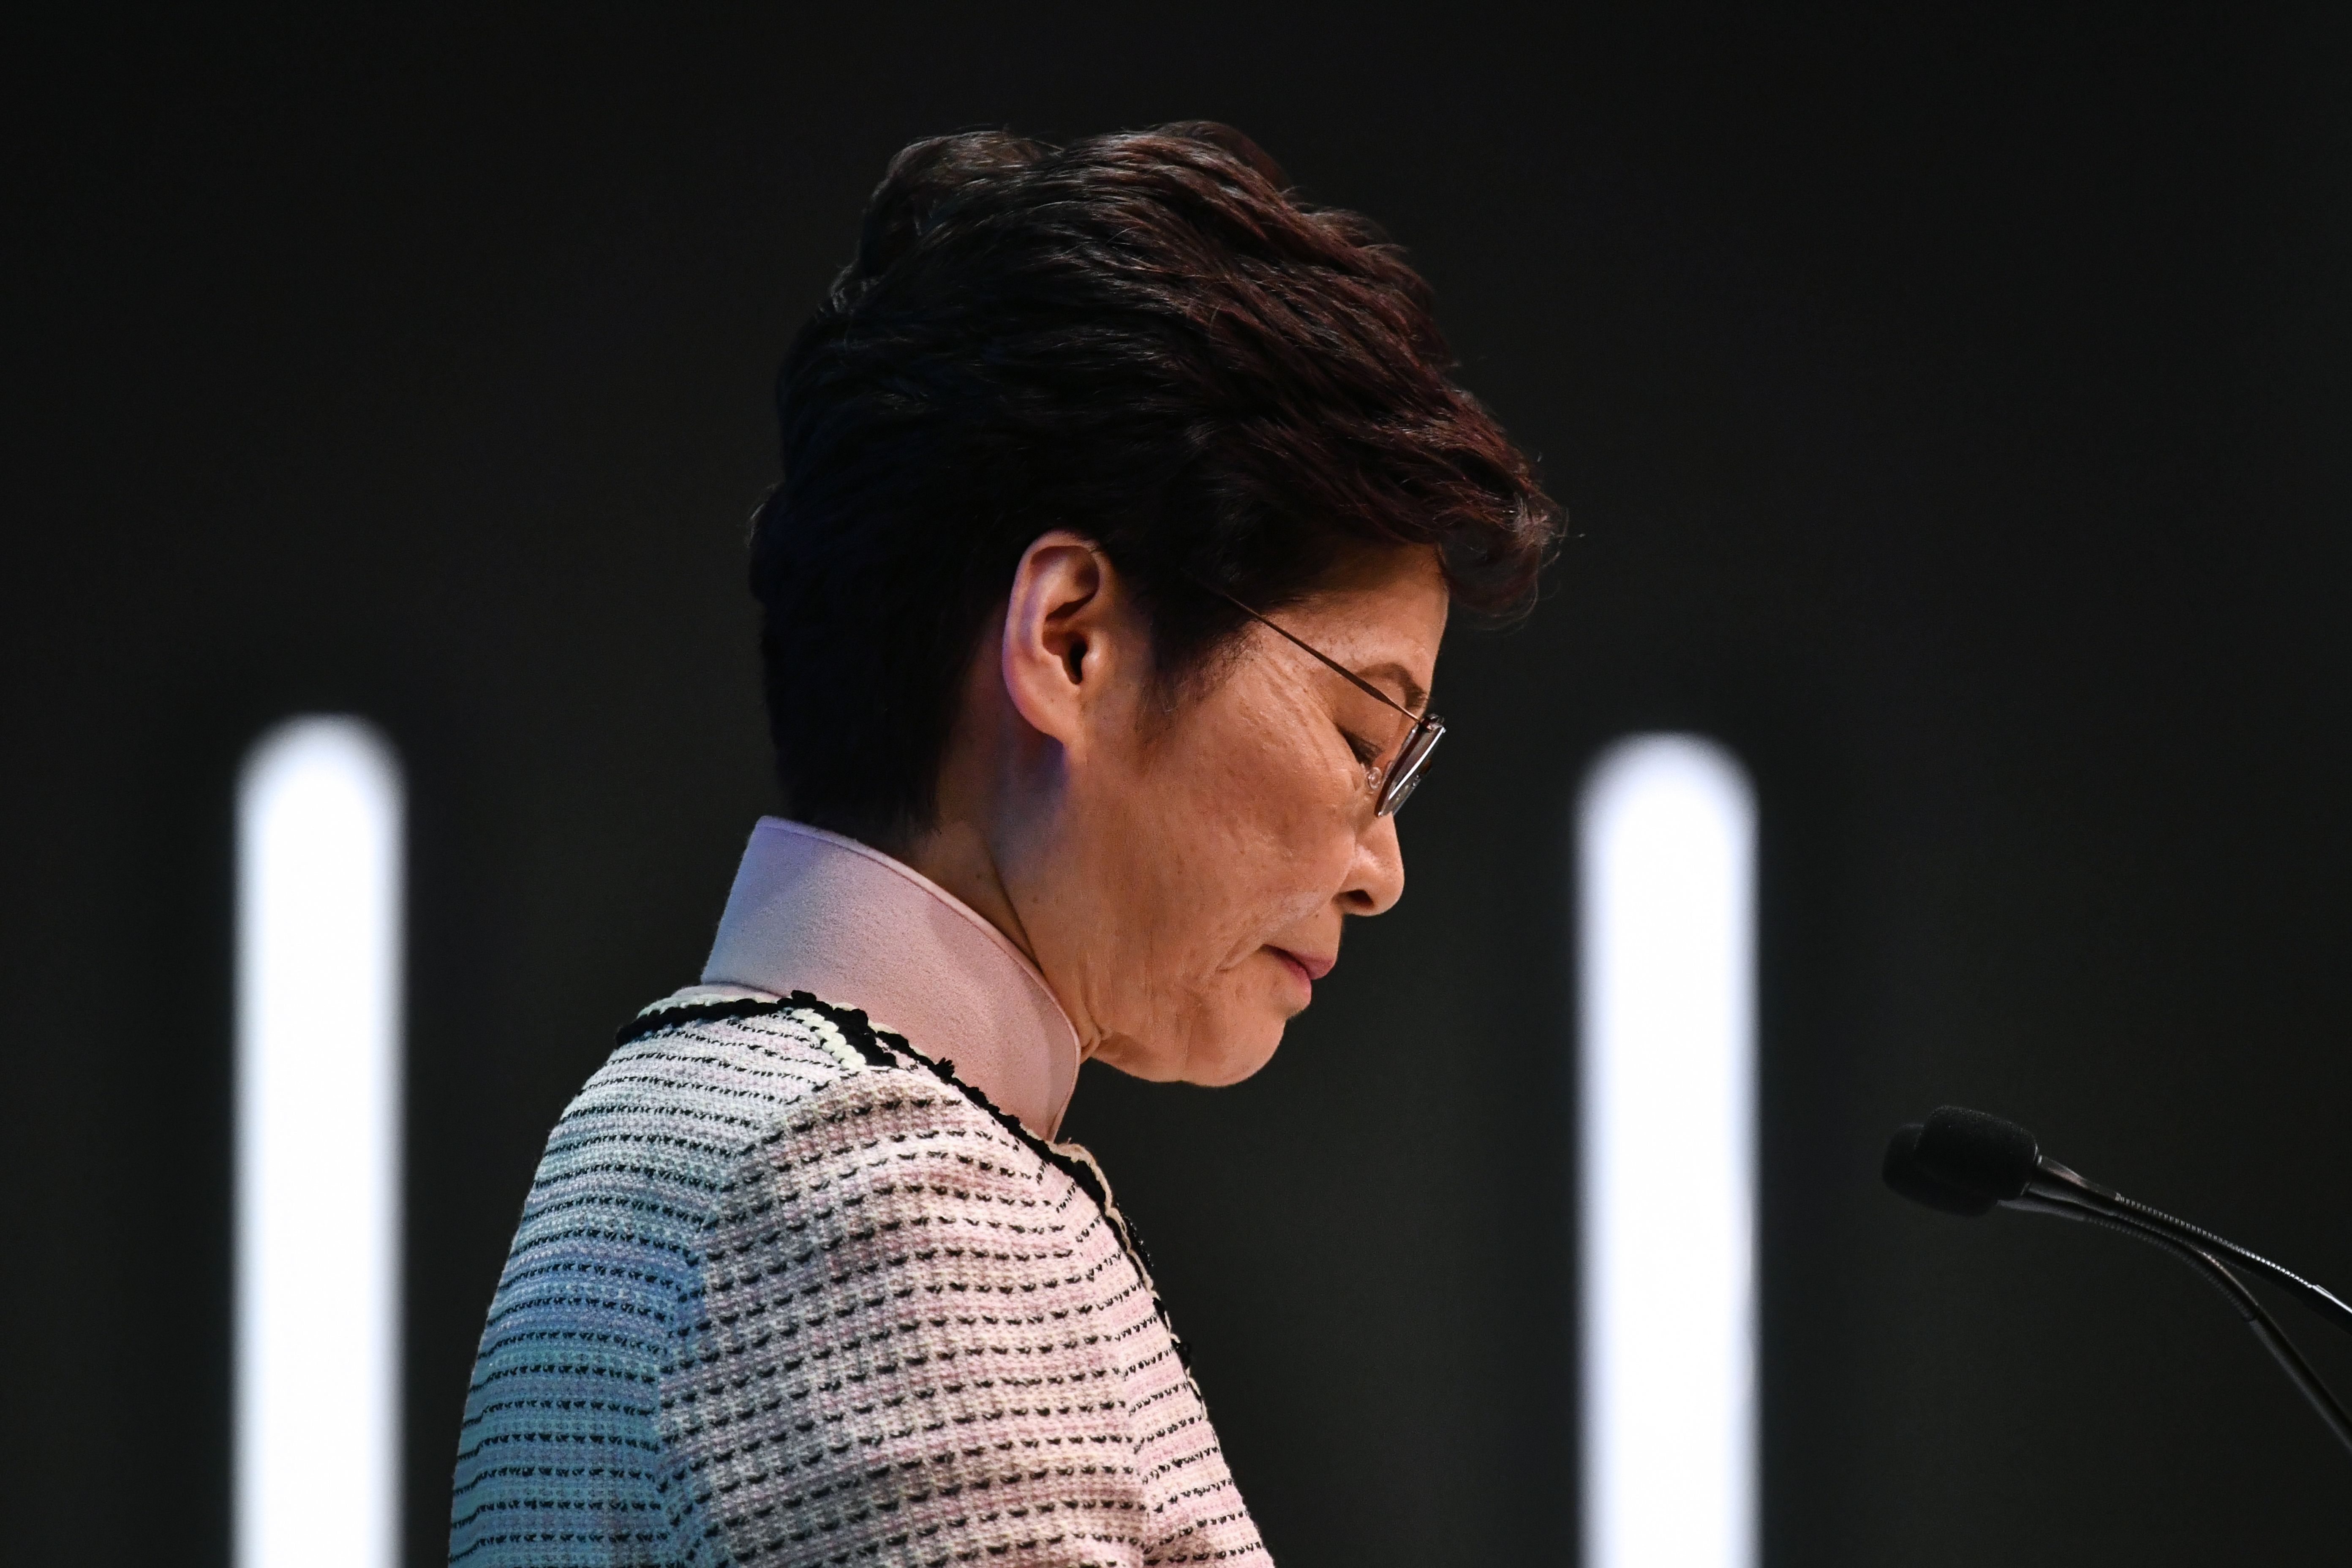 Hong Kong&#039;s Chief Executive Carrie Lam speaks at a press conference in Hong Kong on October 16, 2019, after she tried twice to begin her annual policy address inside the city&#039;s legislature. -